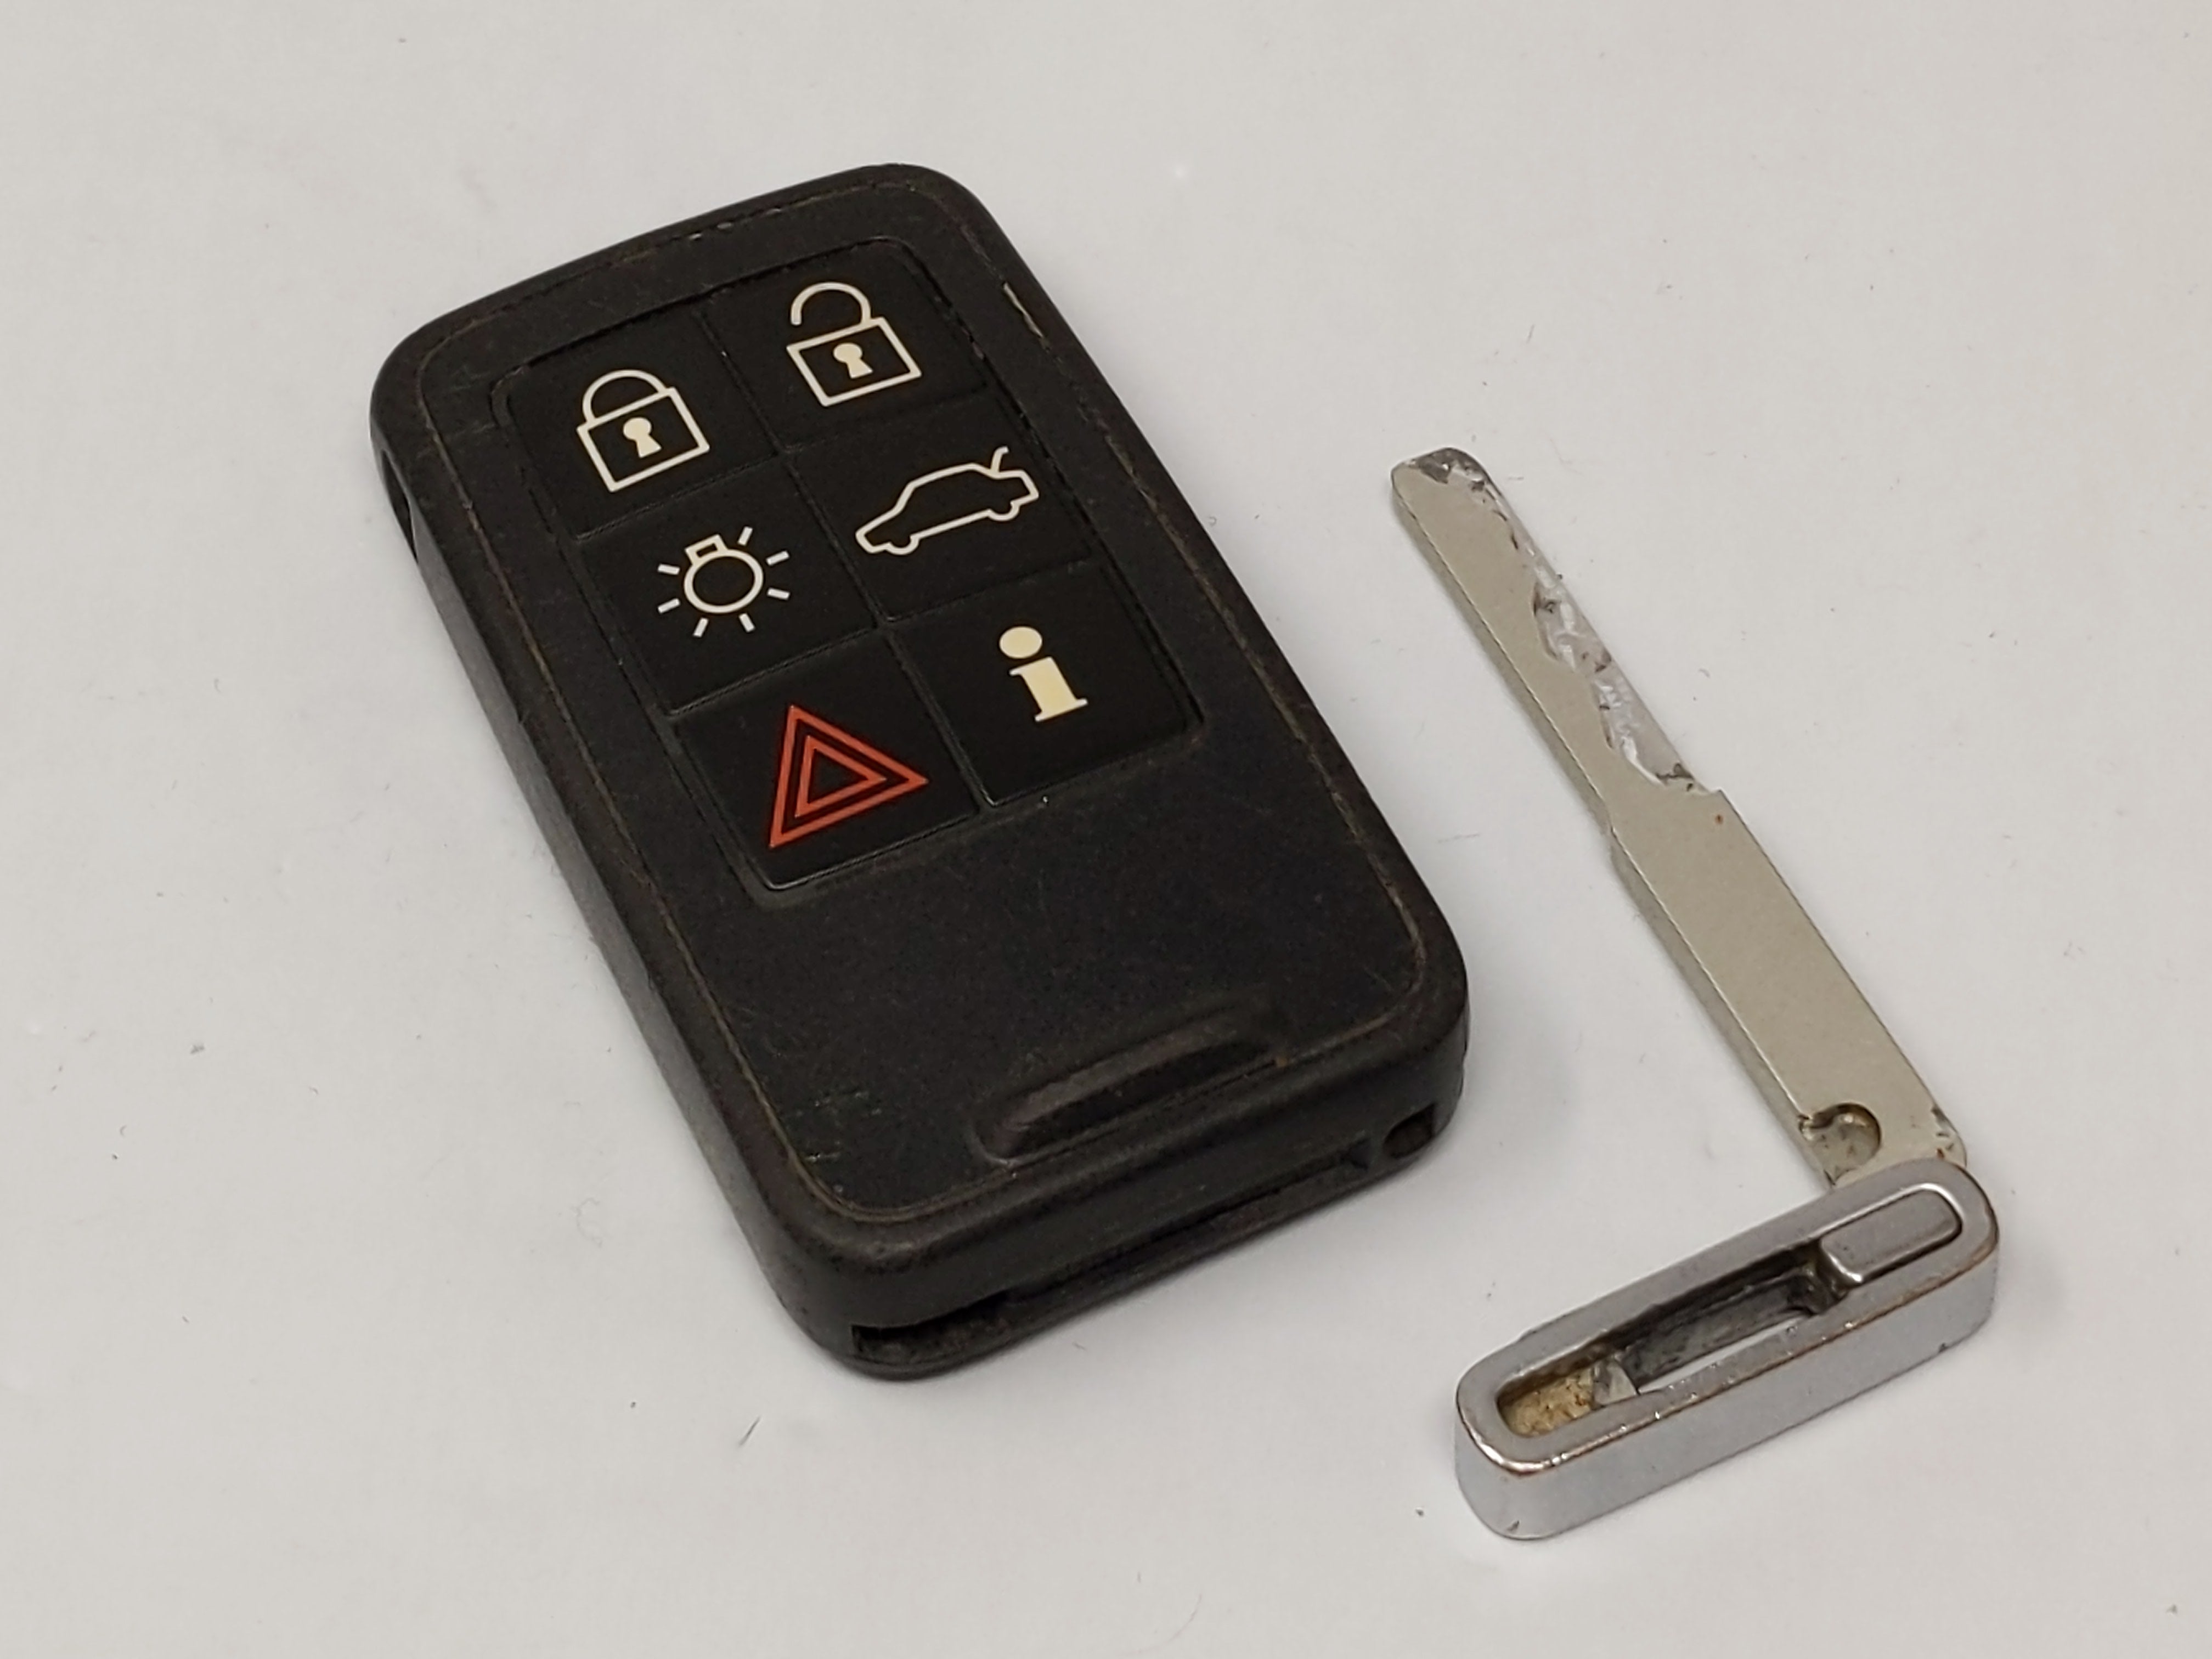 Volvo Keyless Entry Remote Kr55wk49266 5wk49266 30659495 6 Buttons - Oemusedautoparts1.com